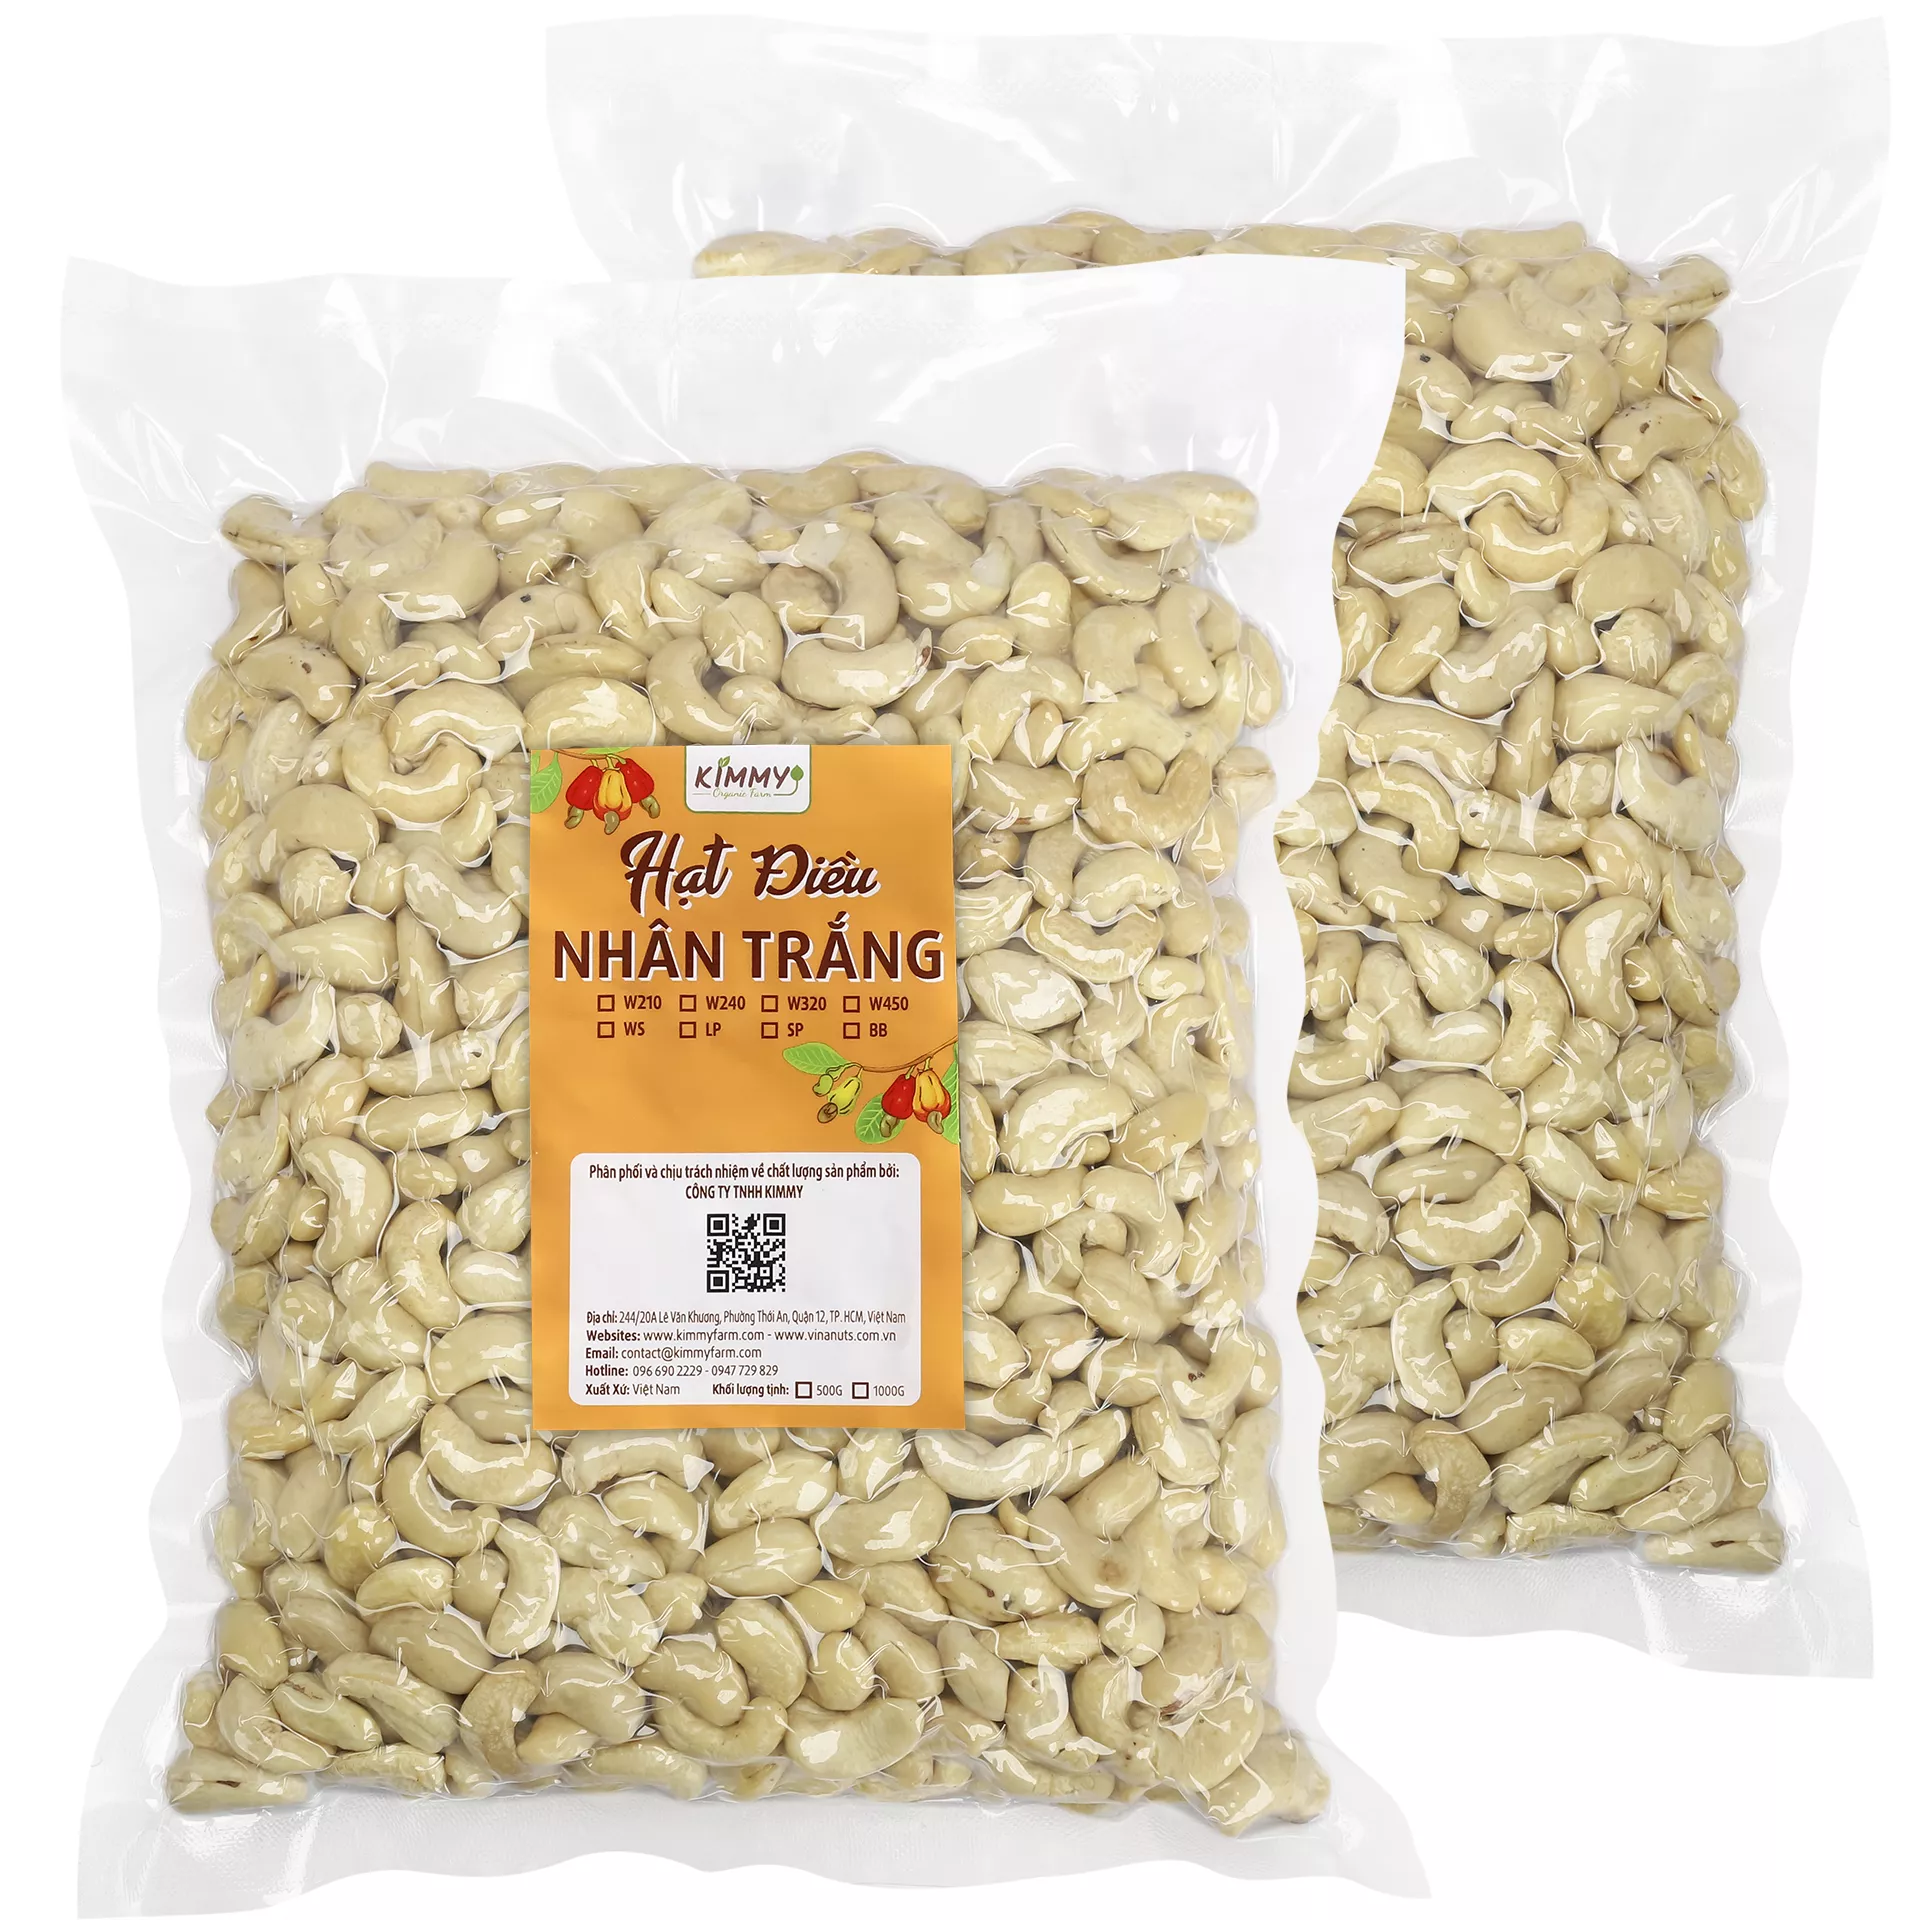 W320 Cashew With 1st Quality - 1KG Packed in Vacuum Bags - Kimmy Farm Vietnam - 1